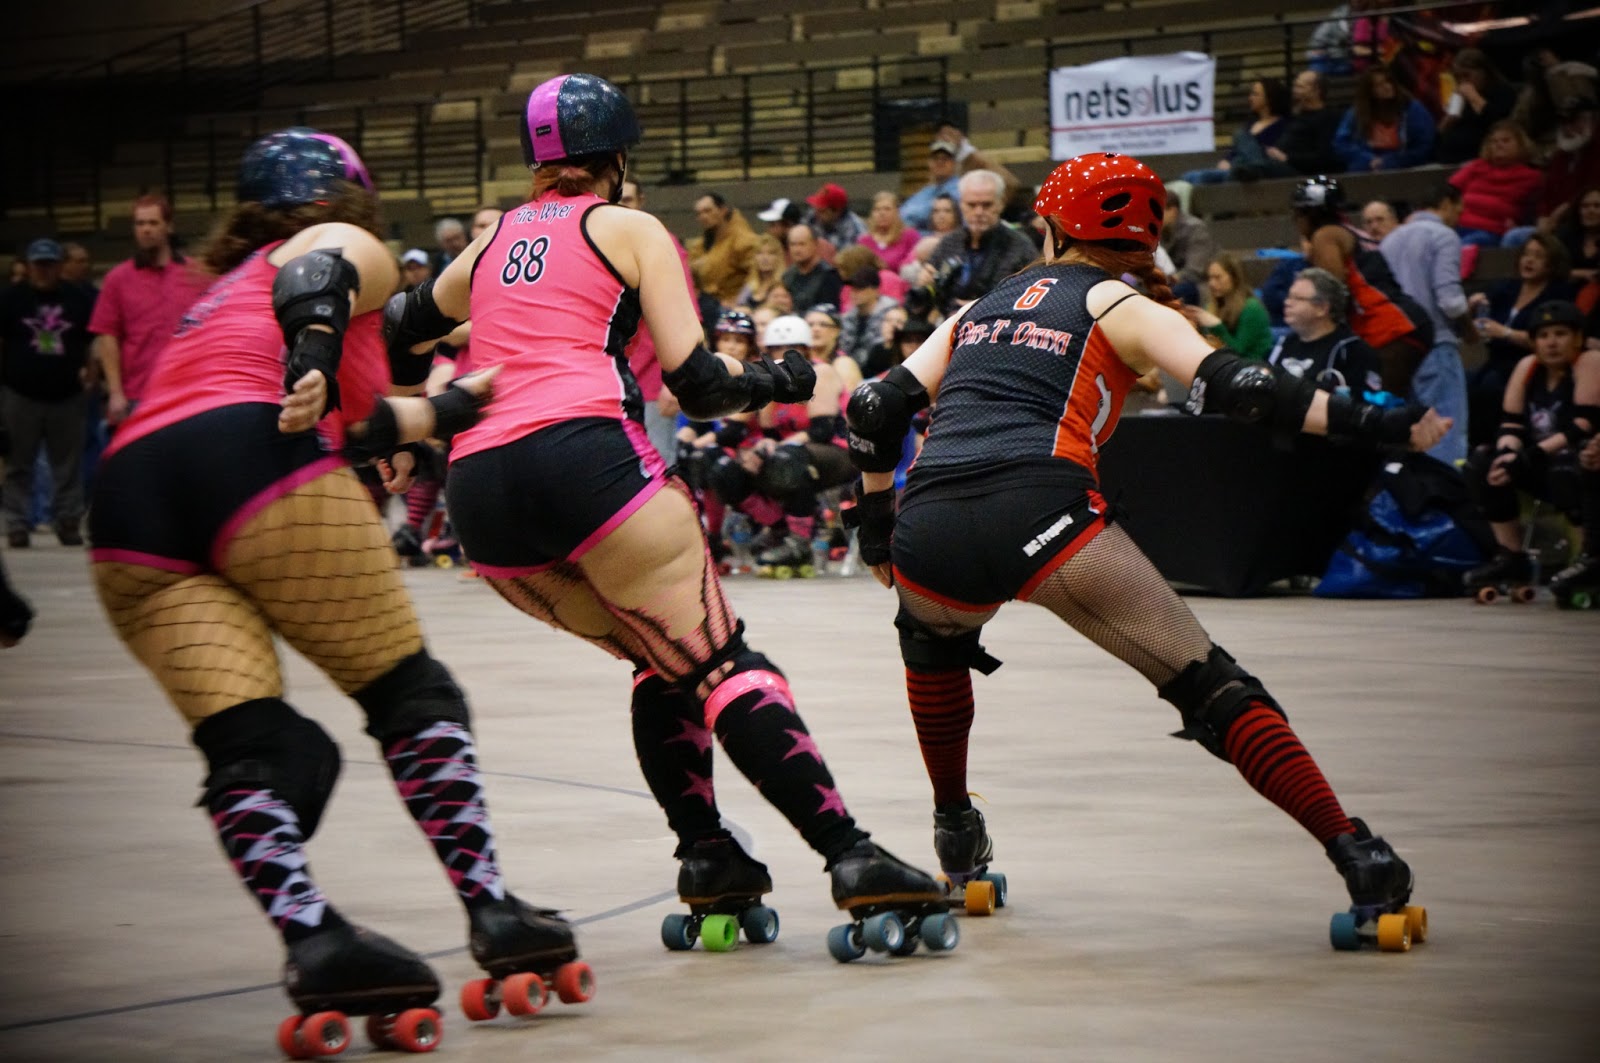 Vintage Technology Obsessions Thrills And Spills At Dead Girl Roller Derby